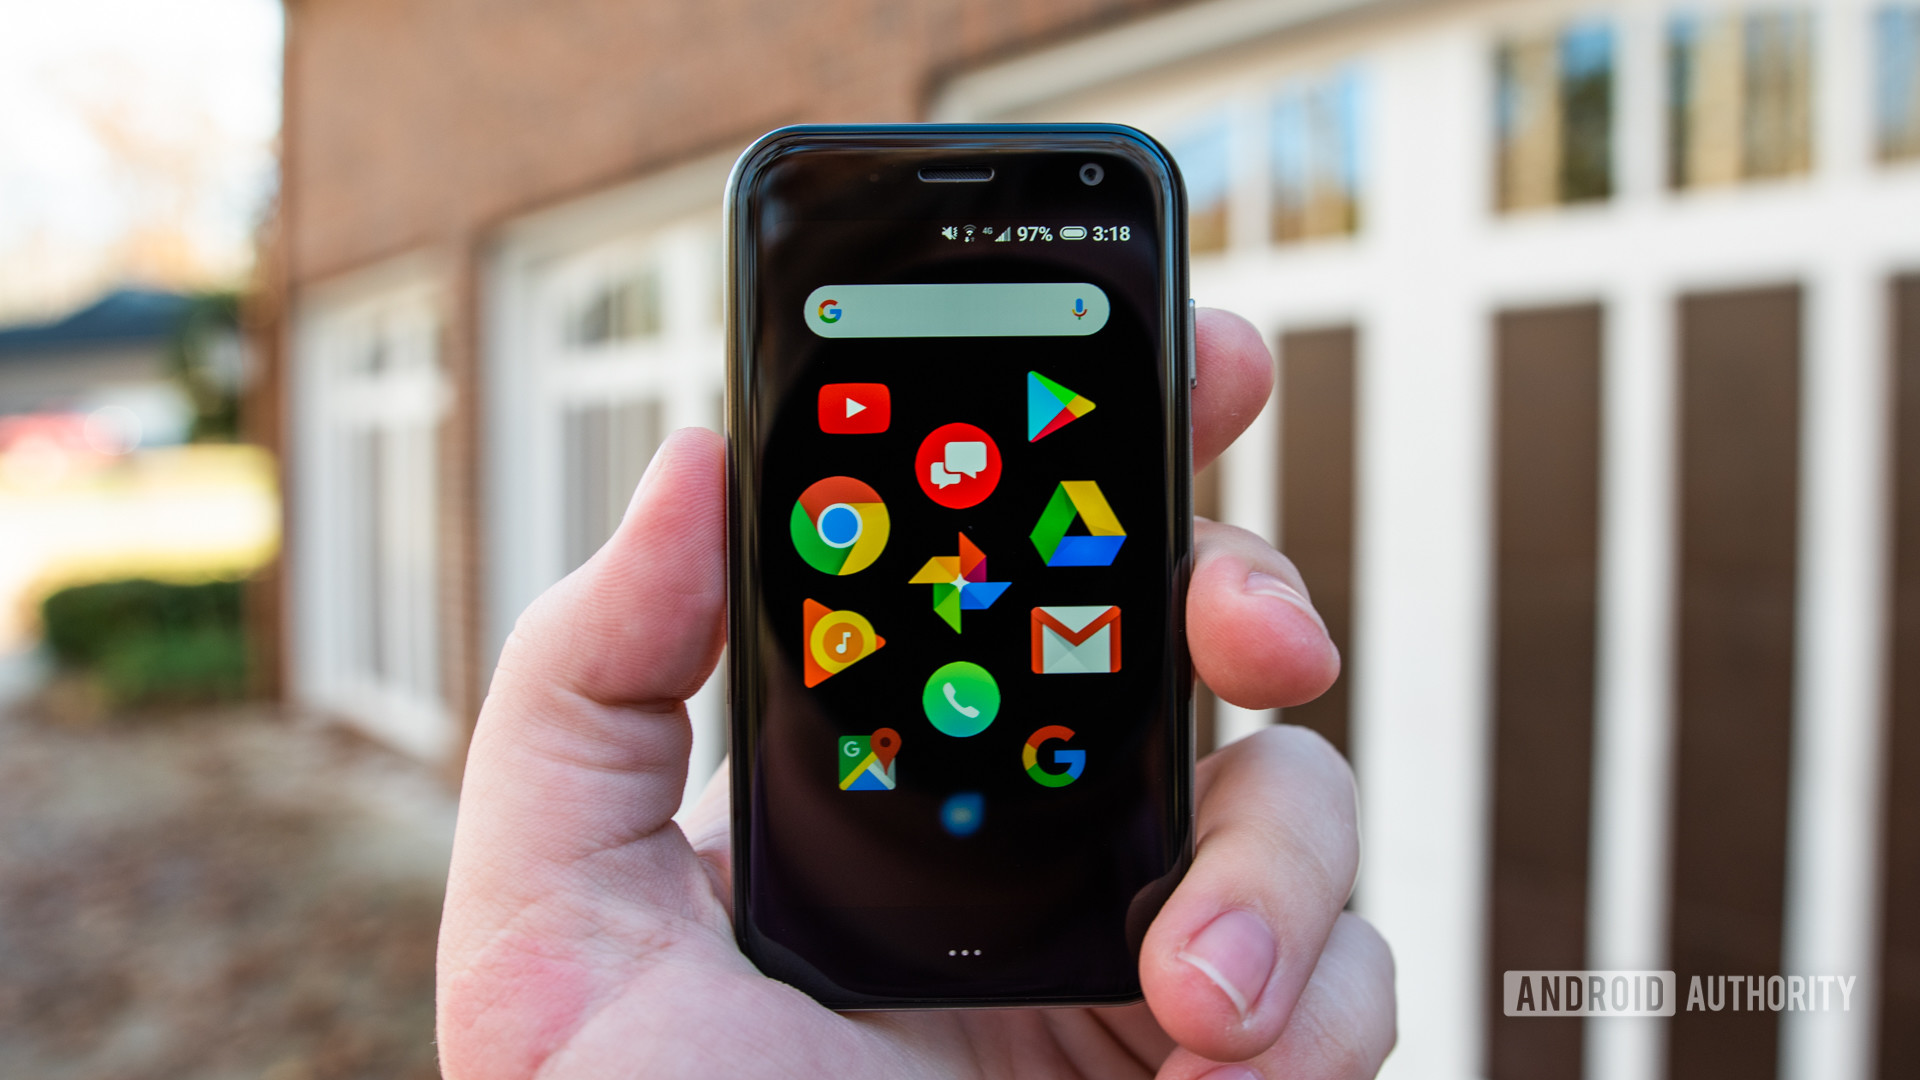 Palm Phone review: Does this live up to the Palm name?